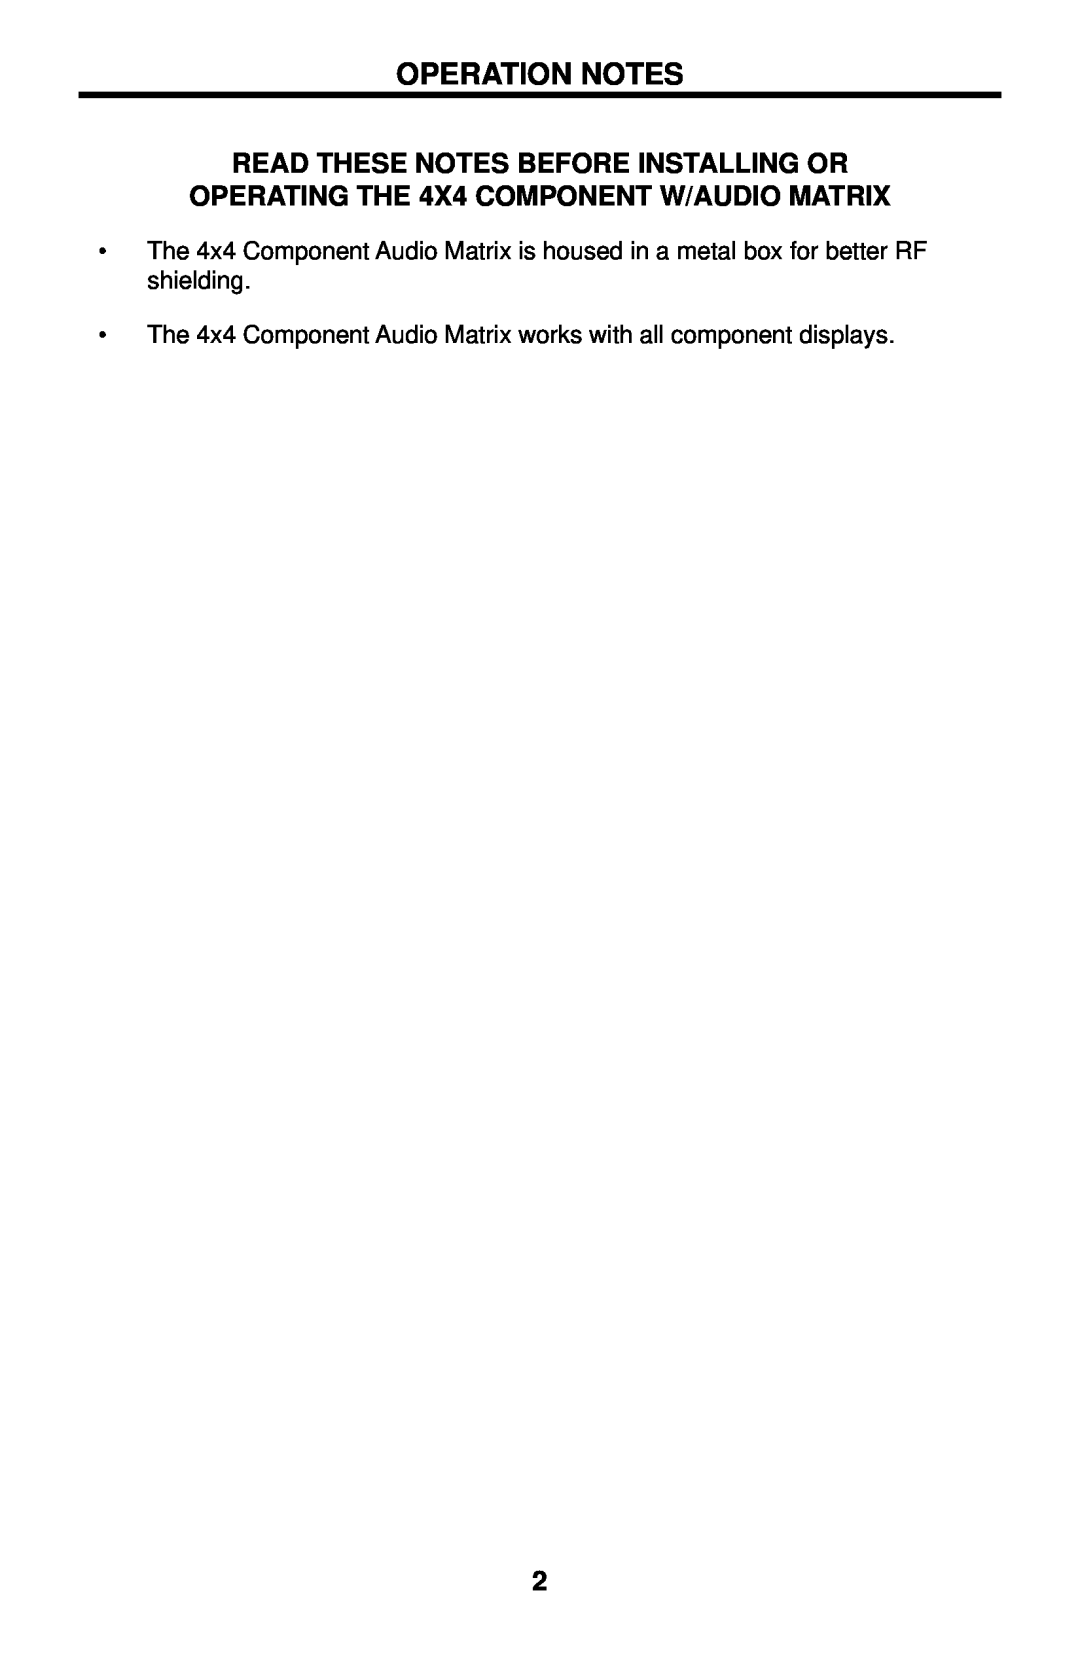 Gefen EXT-COMPAUD-44424 Operation Notes, Read These Notes Before Installing Or, OPERATING THE 4X4 COMPONENT W/AUDIO MATRIX 